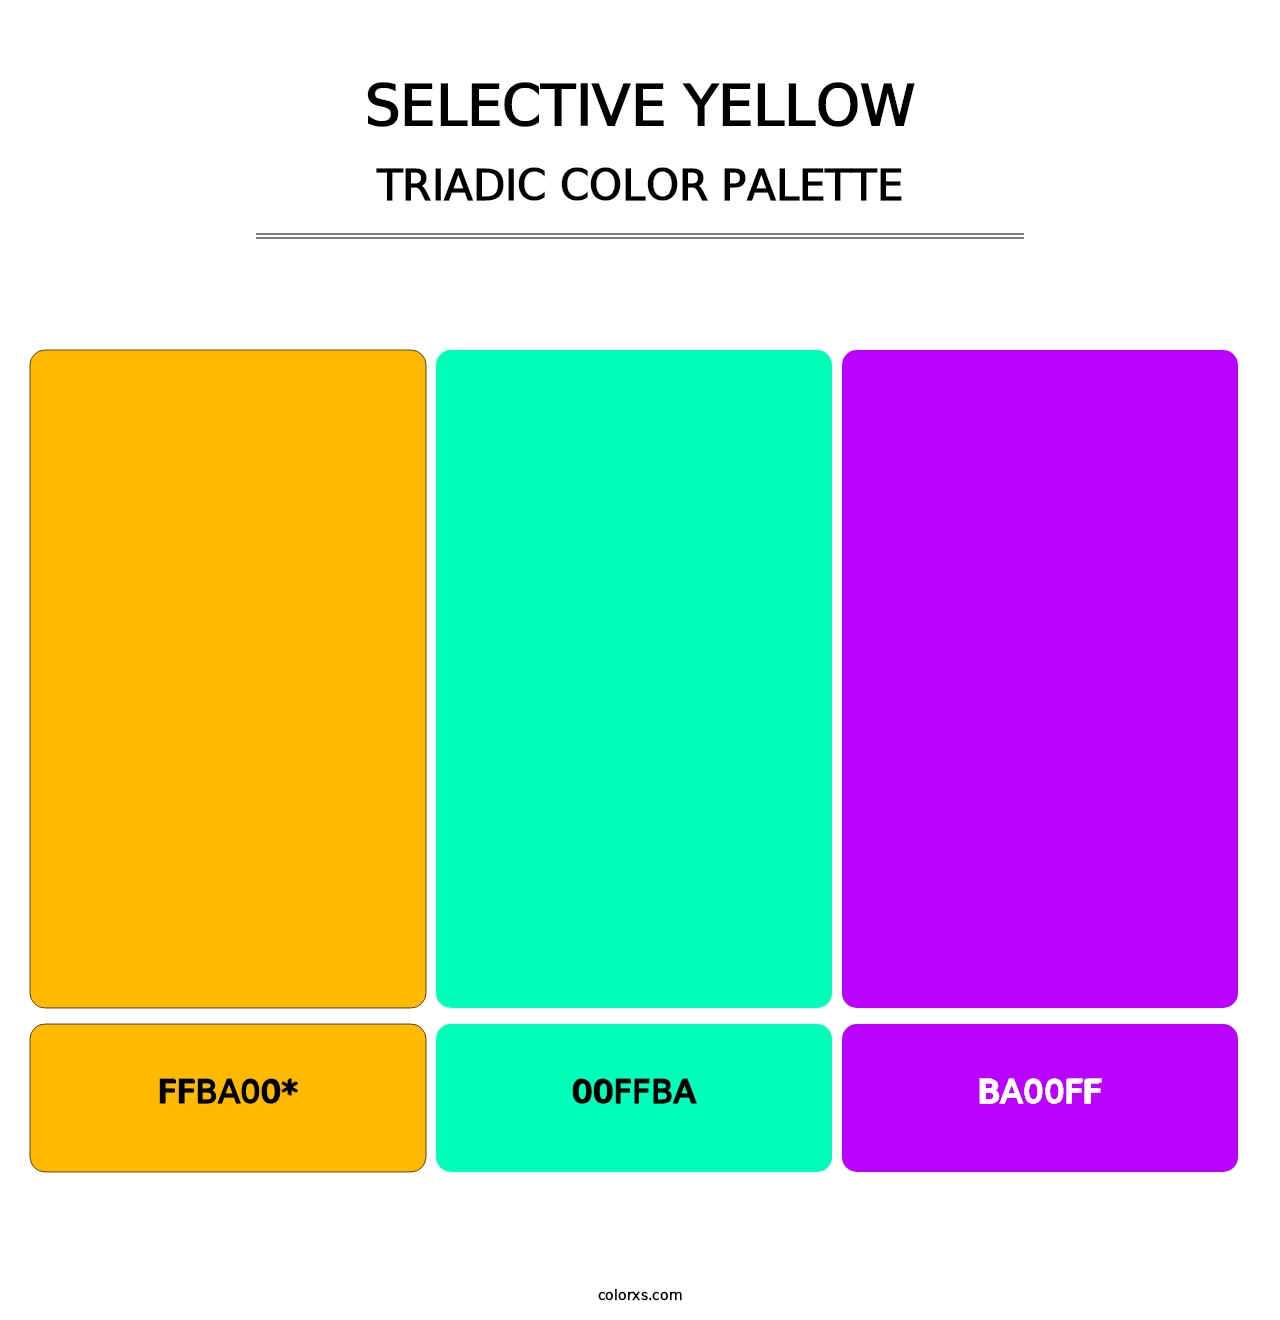 Selective yellow - Triadic Color Palette